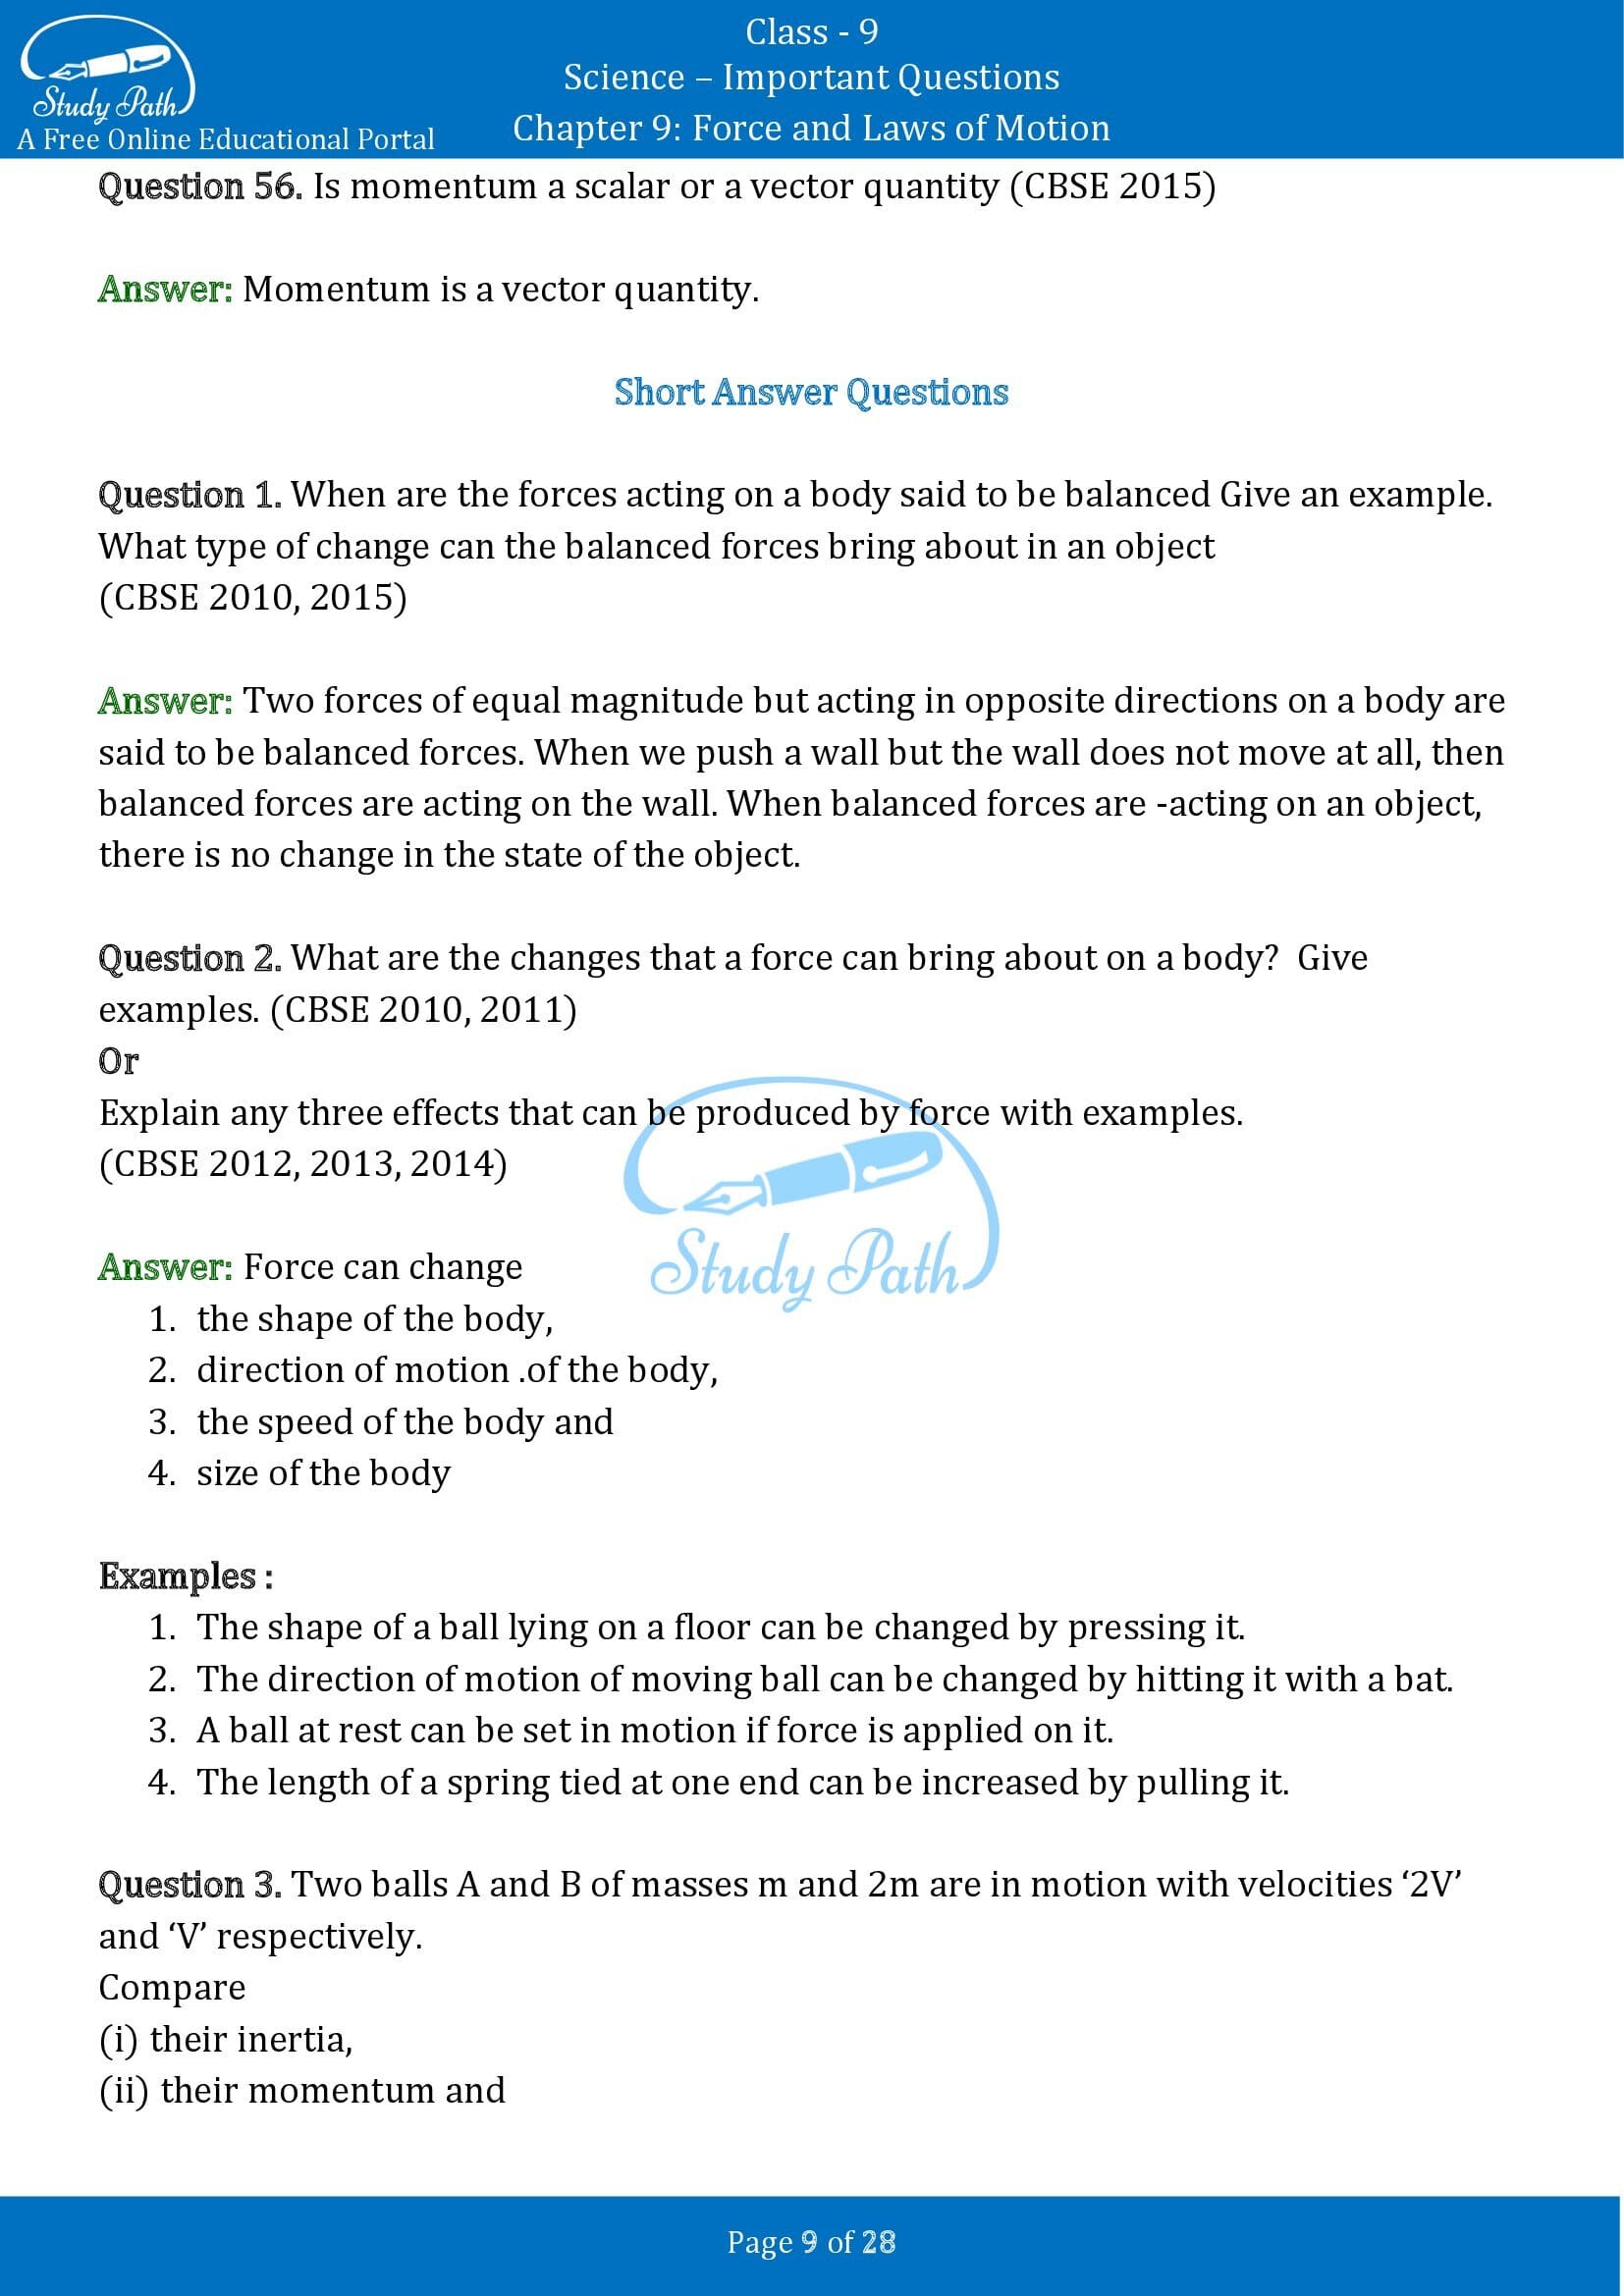 Important Questions for Class 9 Science Chapter 9 Force and Laws of Motion 00009